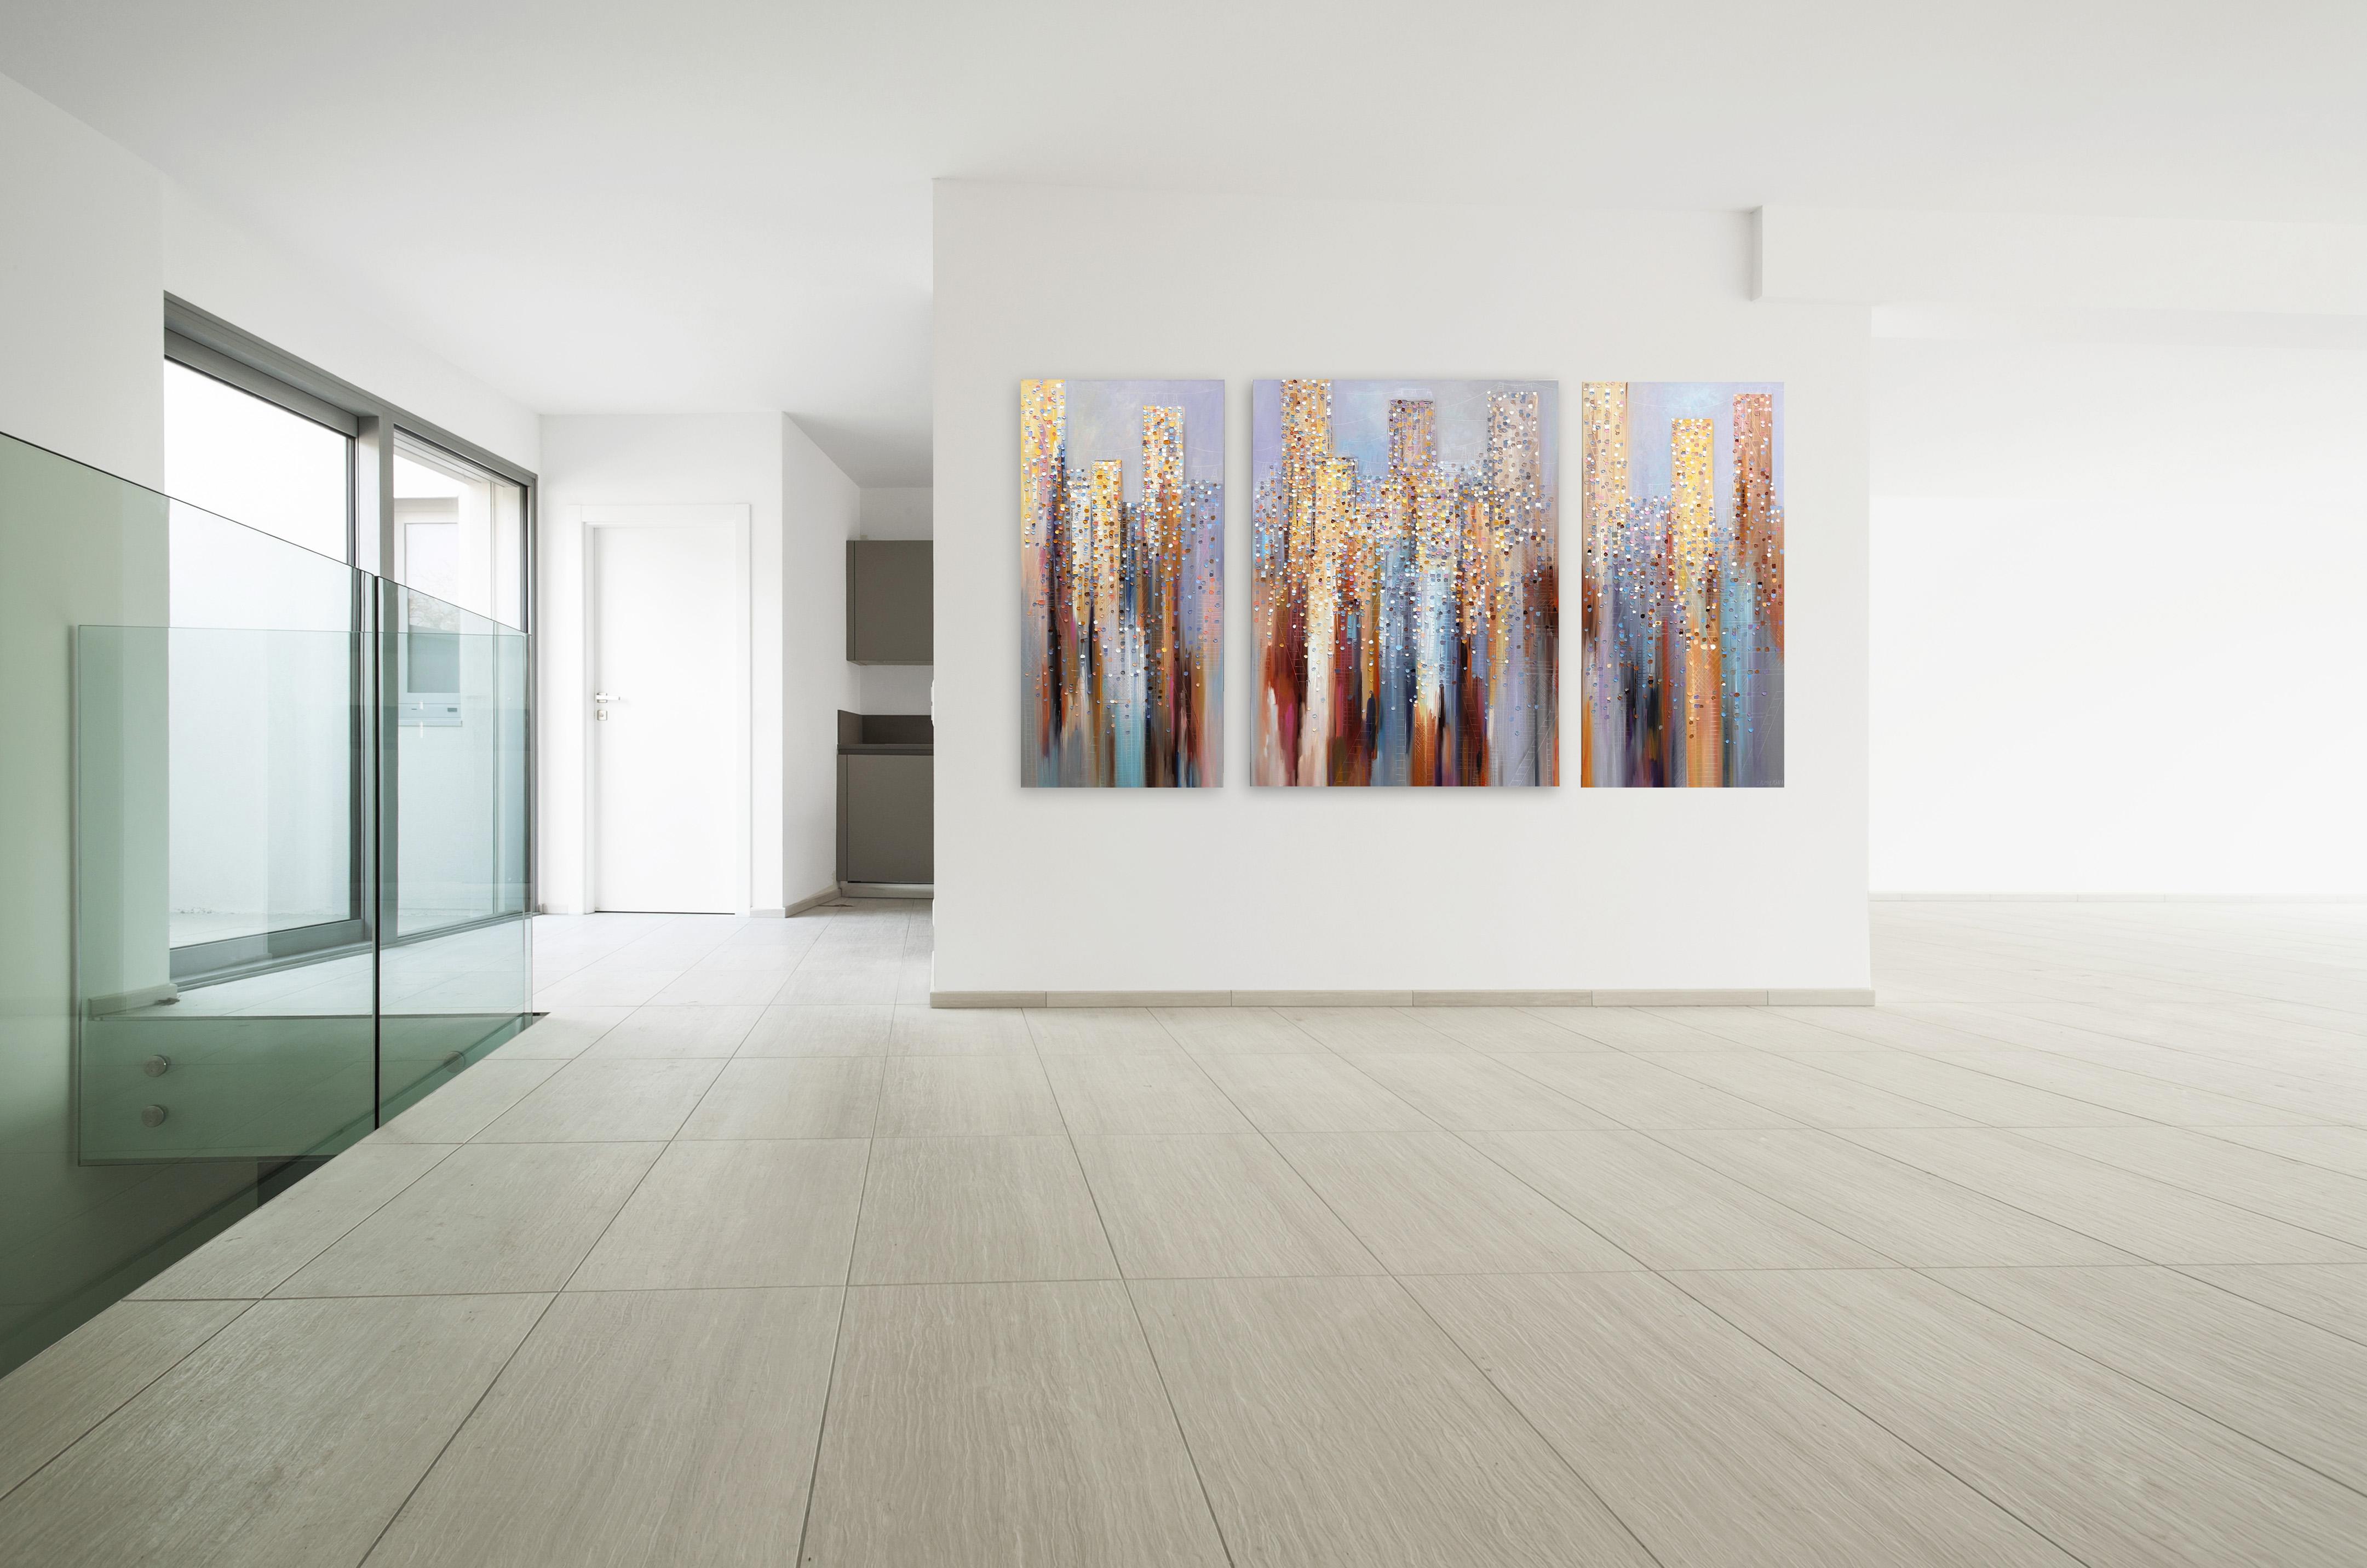 City In The Clouds (Triptych)  - Original Textural Oil Painting on Canvas 2